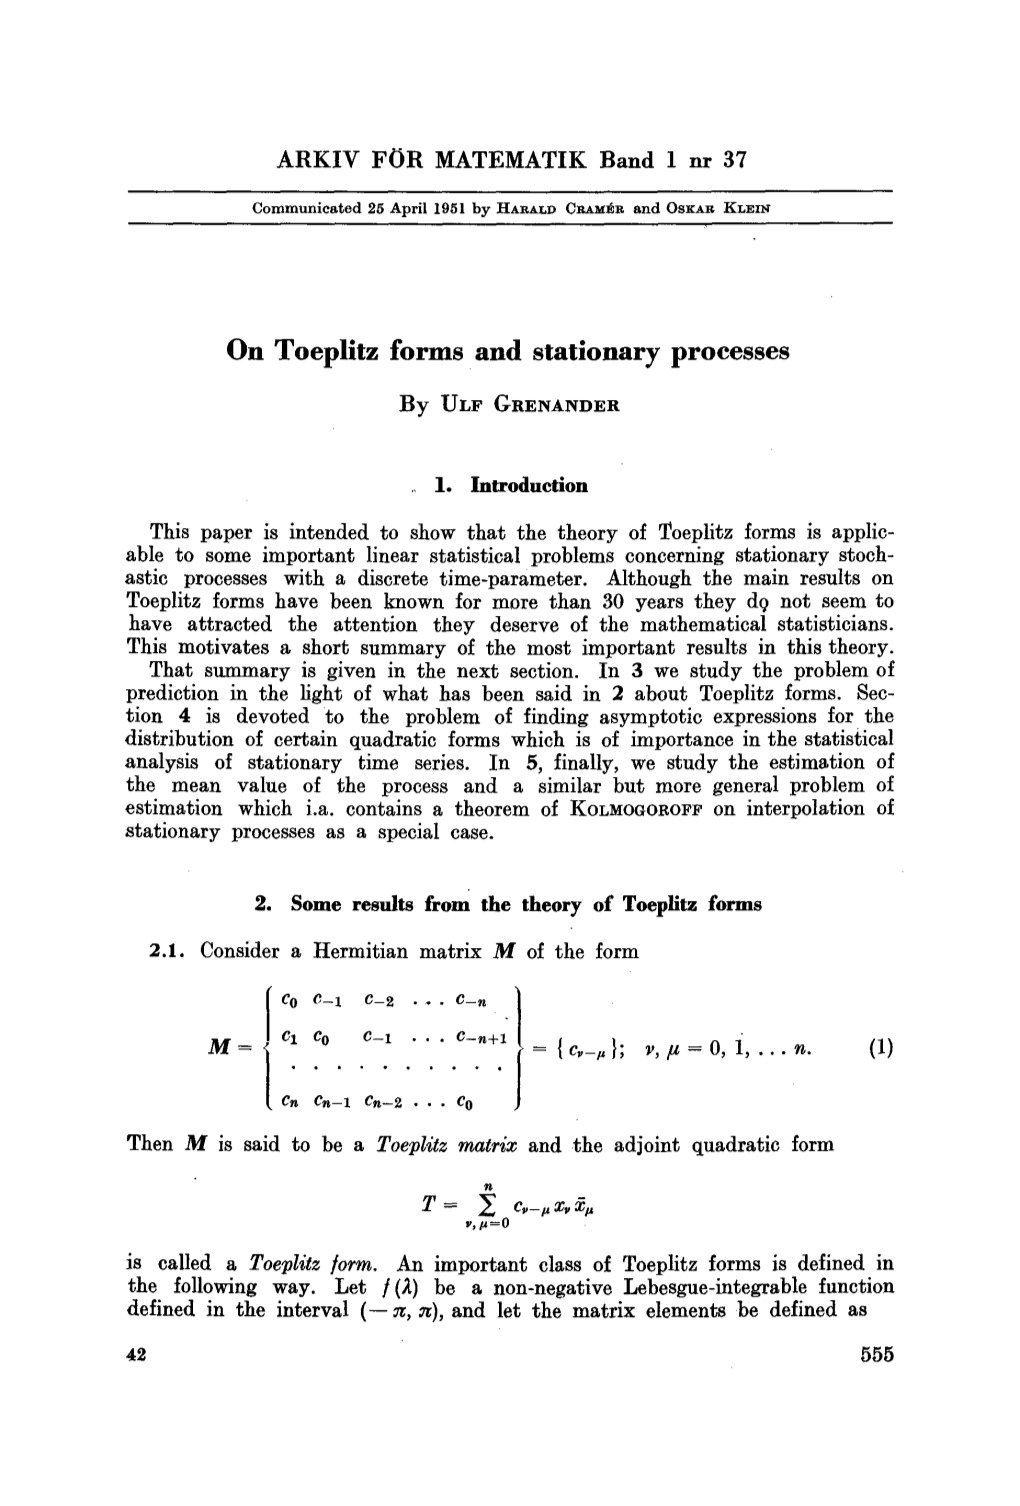 On Toeplitz Forms and Stationary Processes